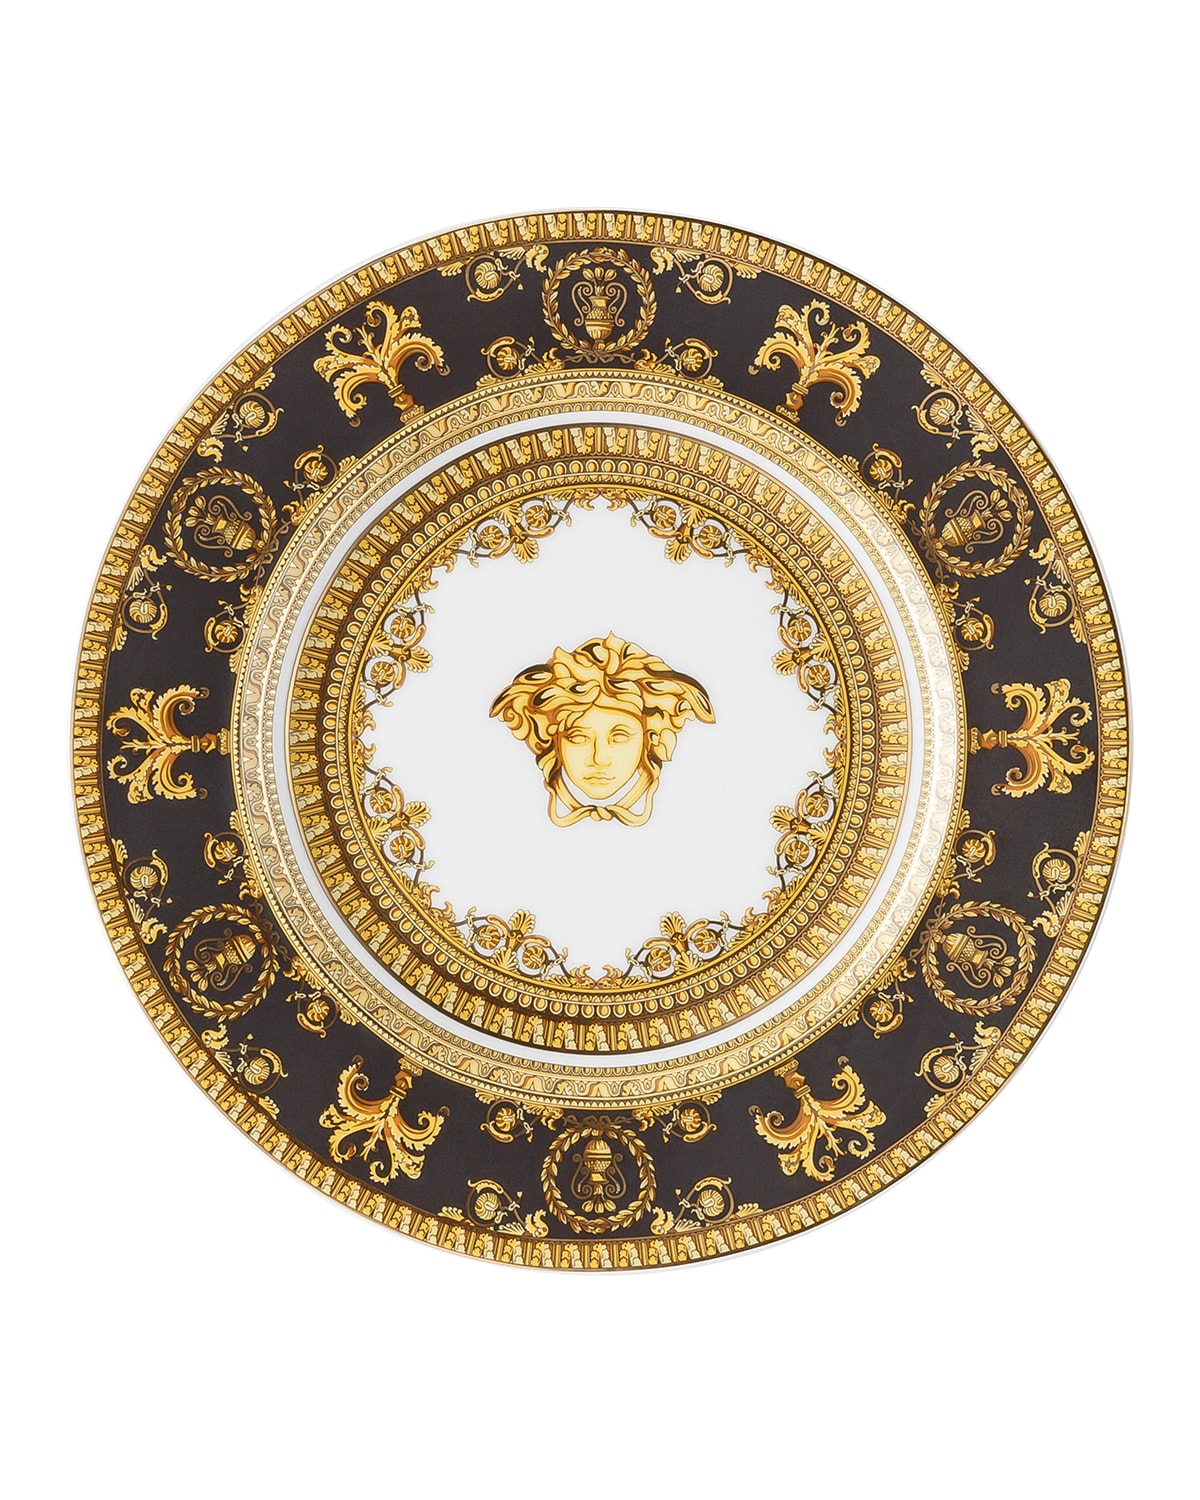 VERSACE I LOVE BAROQUE BREAD AND BUTTER PLATE,PROD203900134